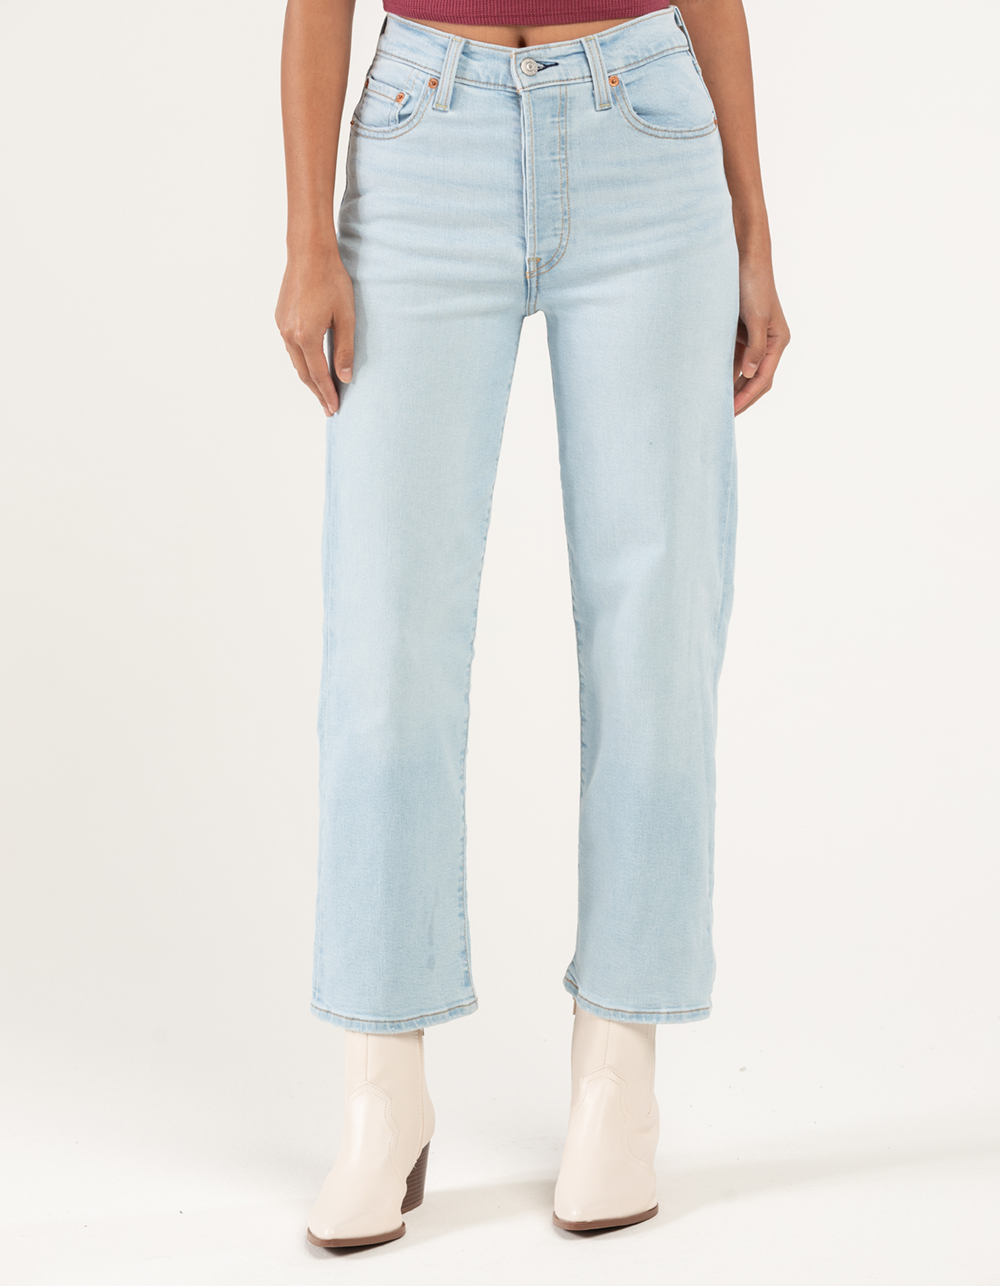 LEVI'S Womens Ribcage Straight Ankle Jeans - LIGHT WASH | Tillys